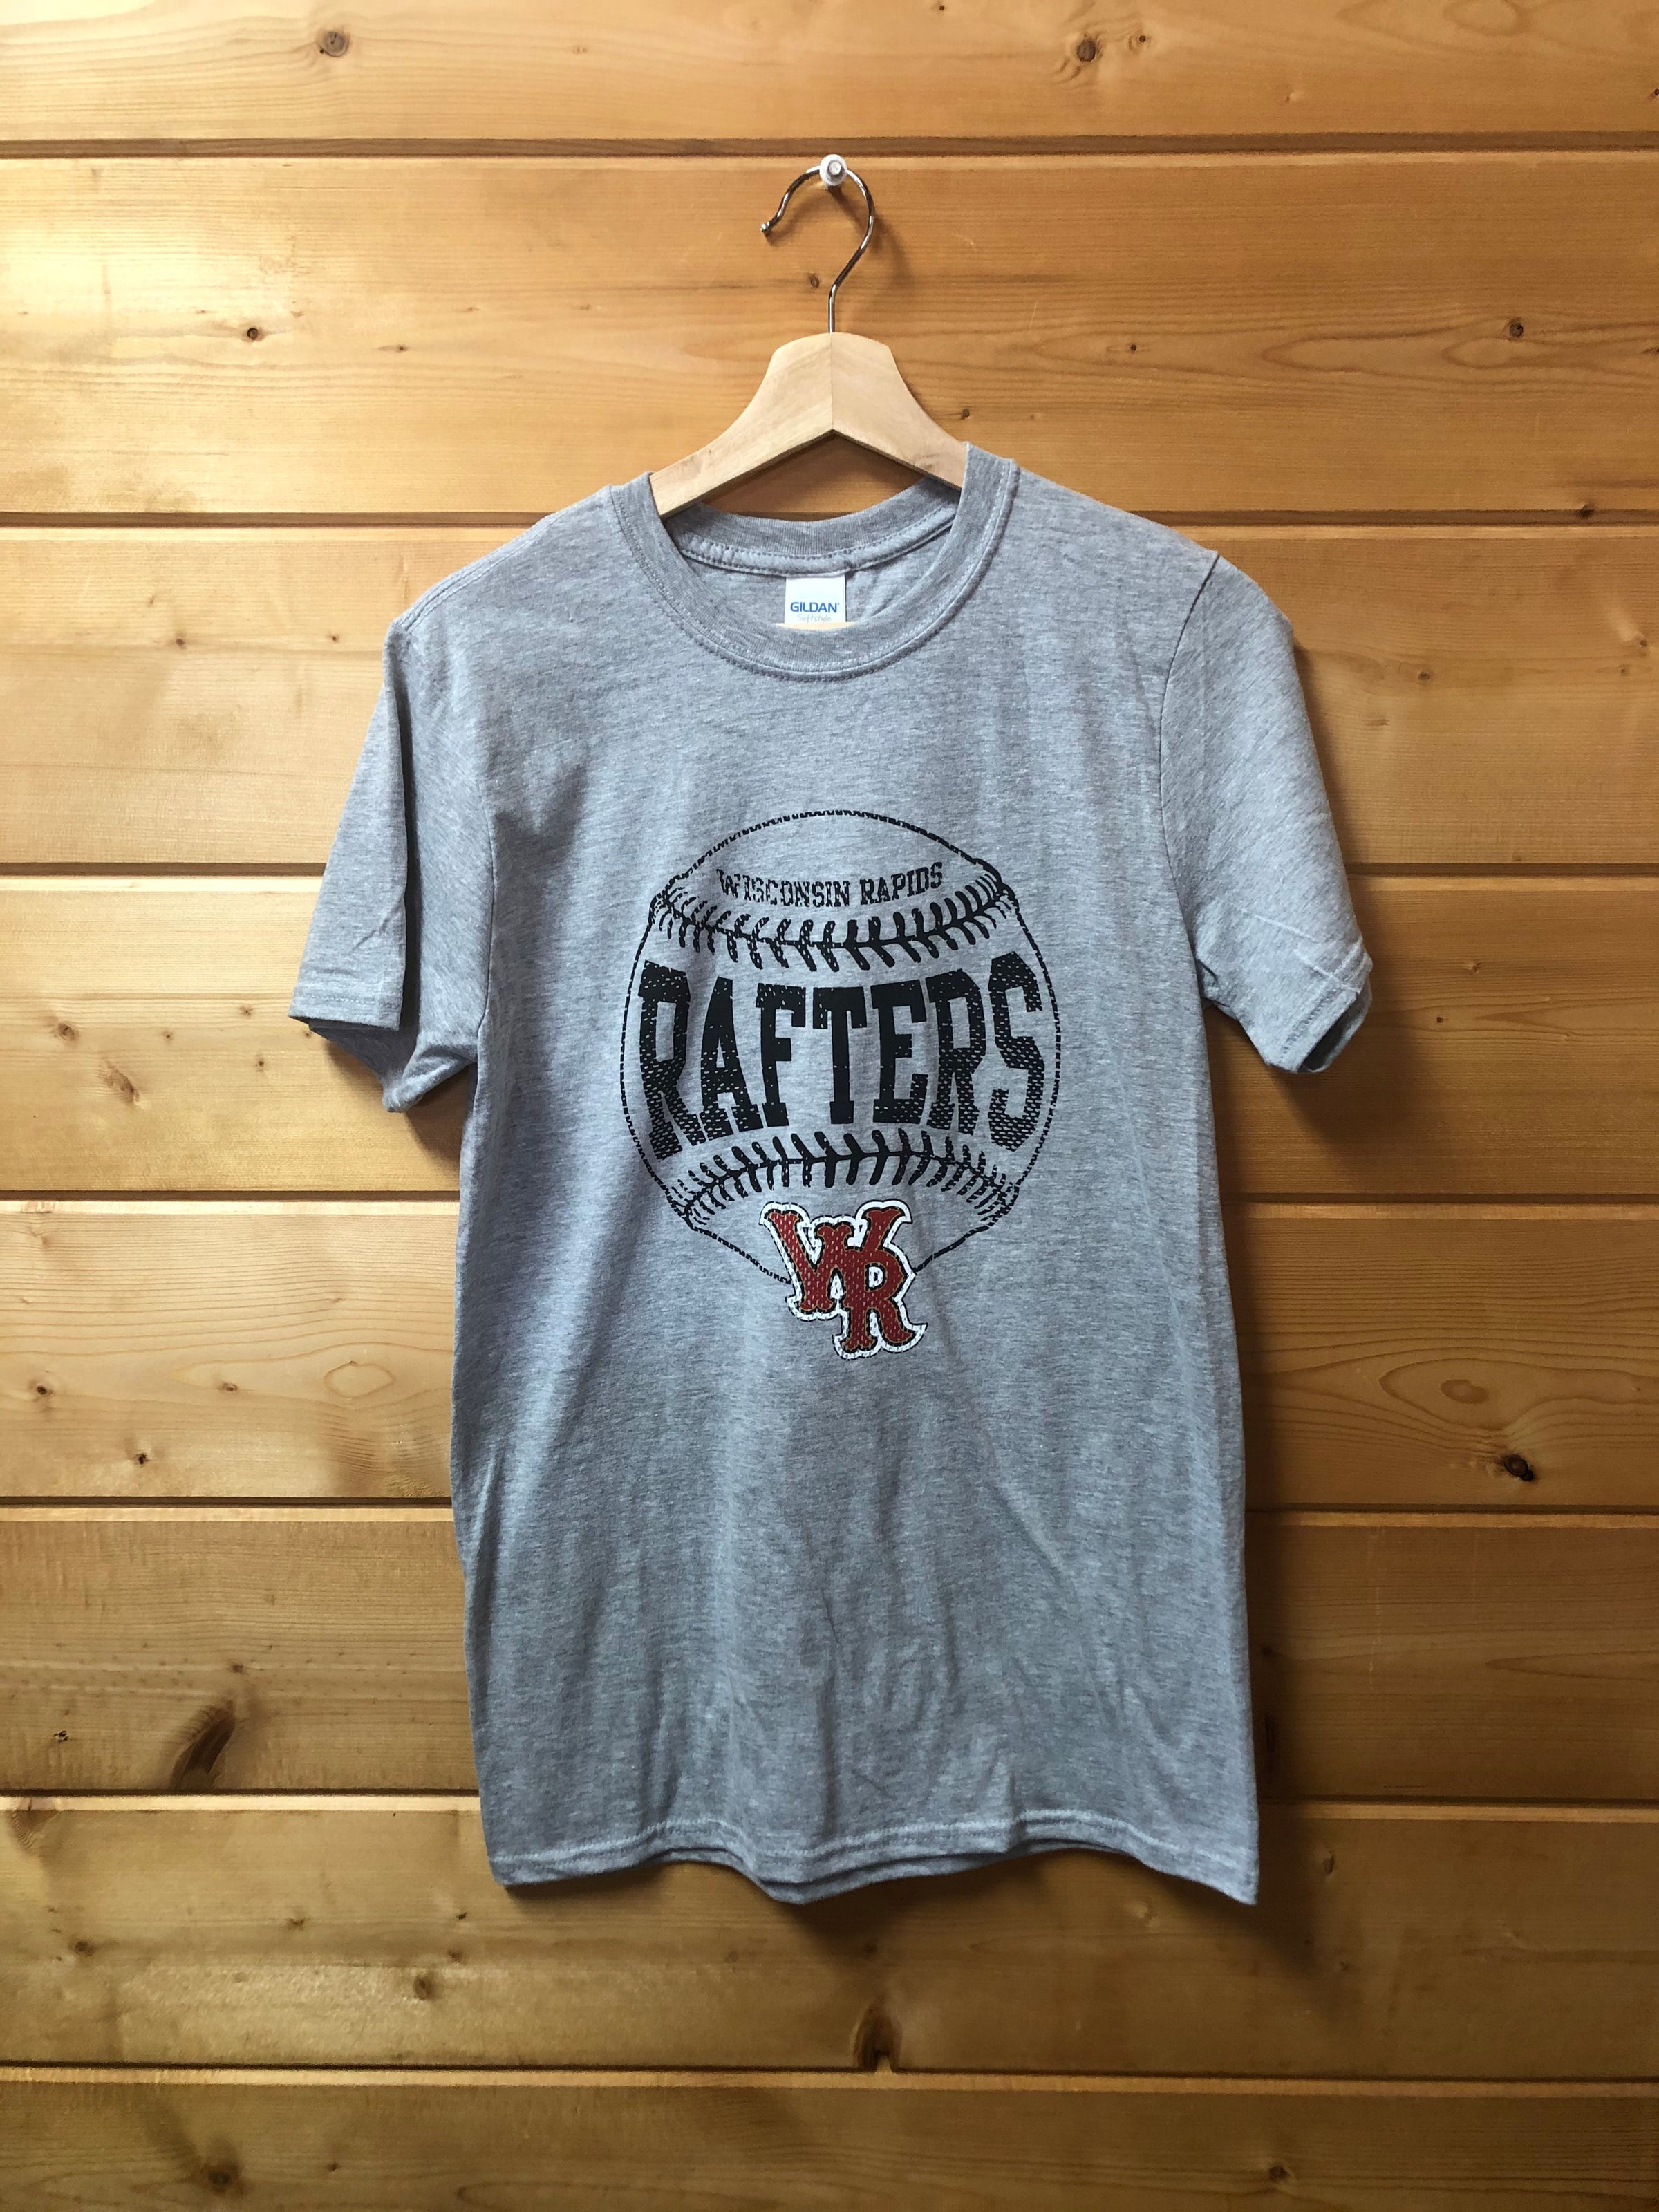 Rafters And Fey Printing Present Turn Back The Clock Jersey Auction -  Wisconsin Rapids Rafters